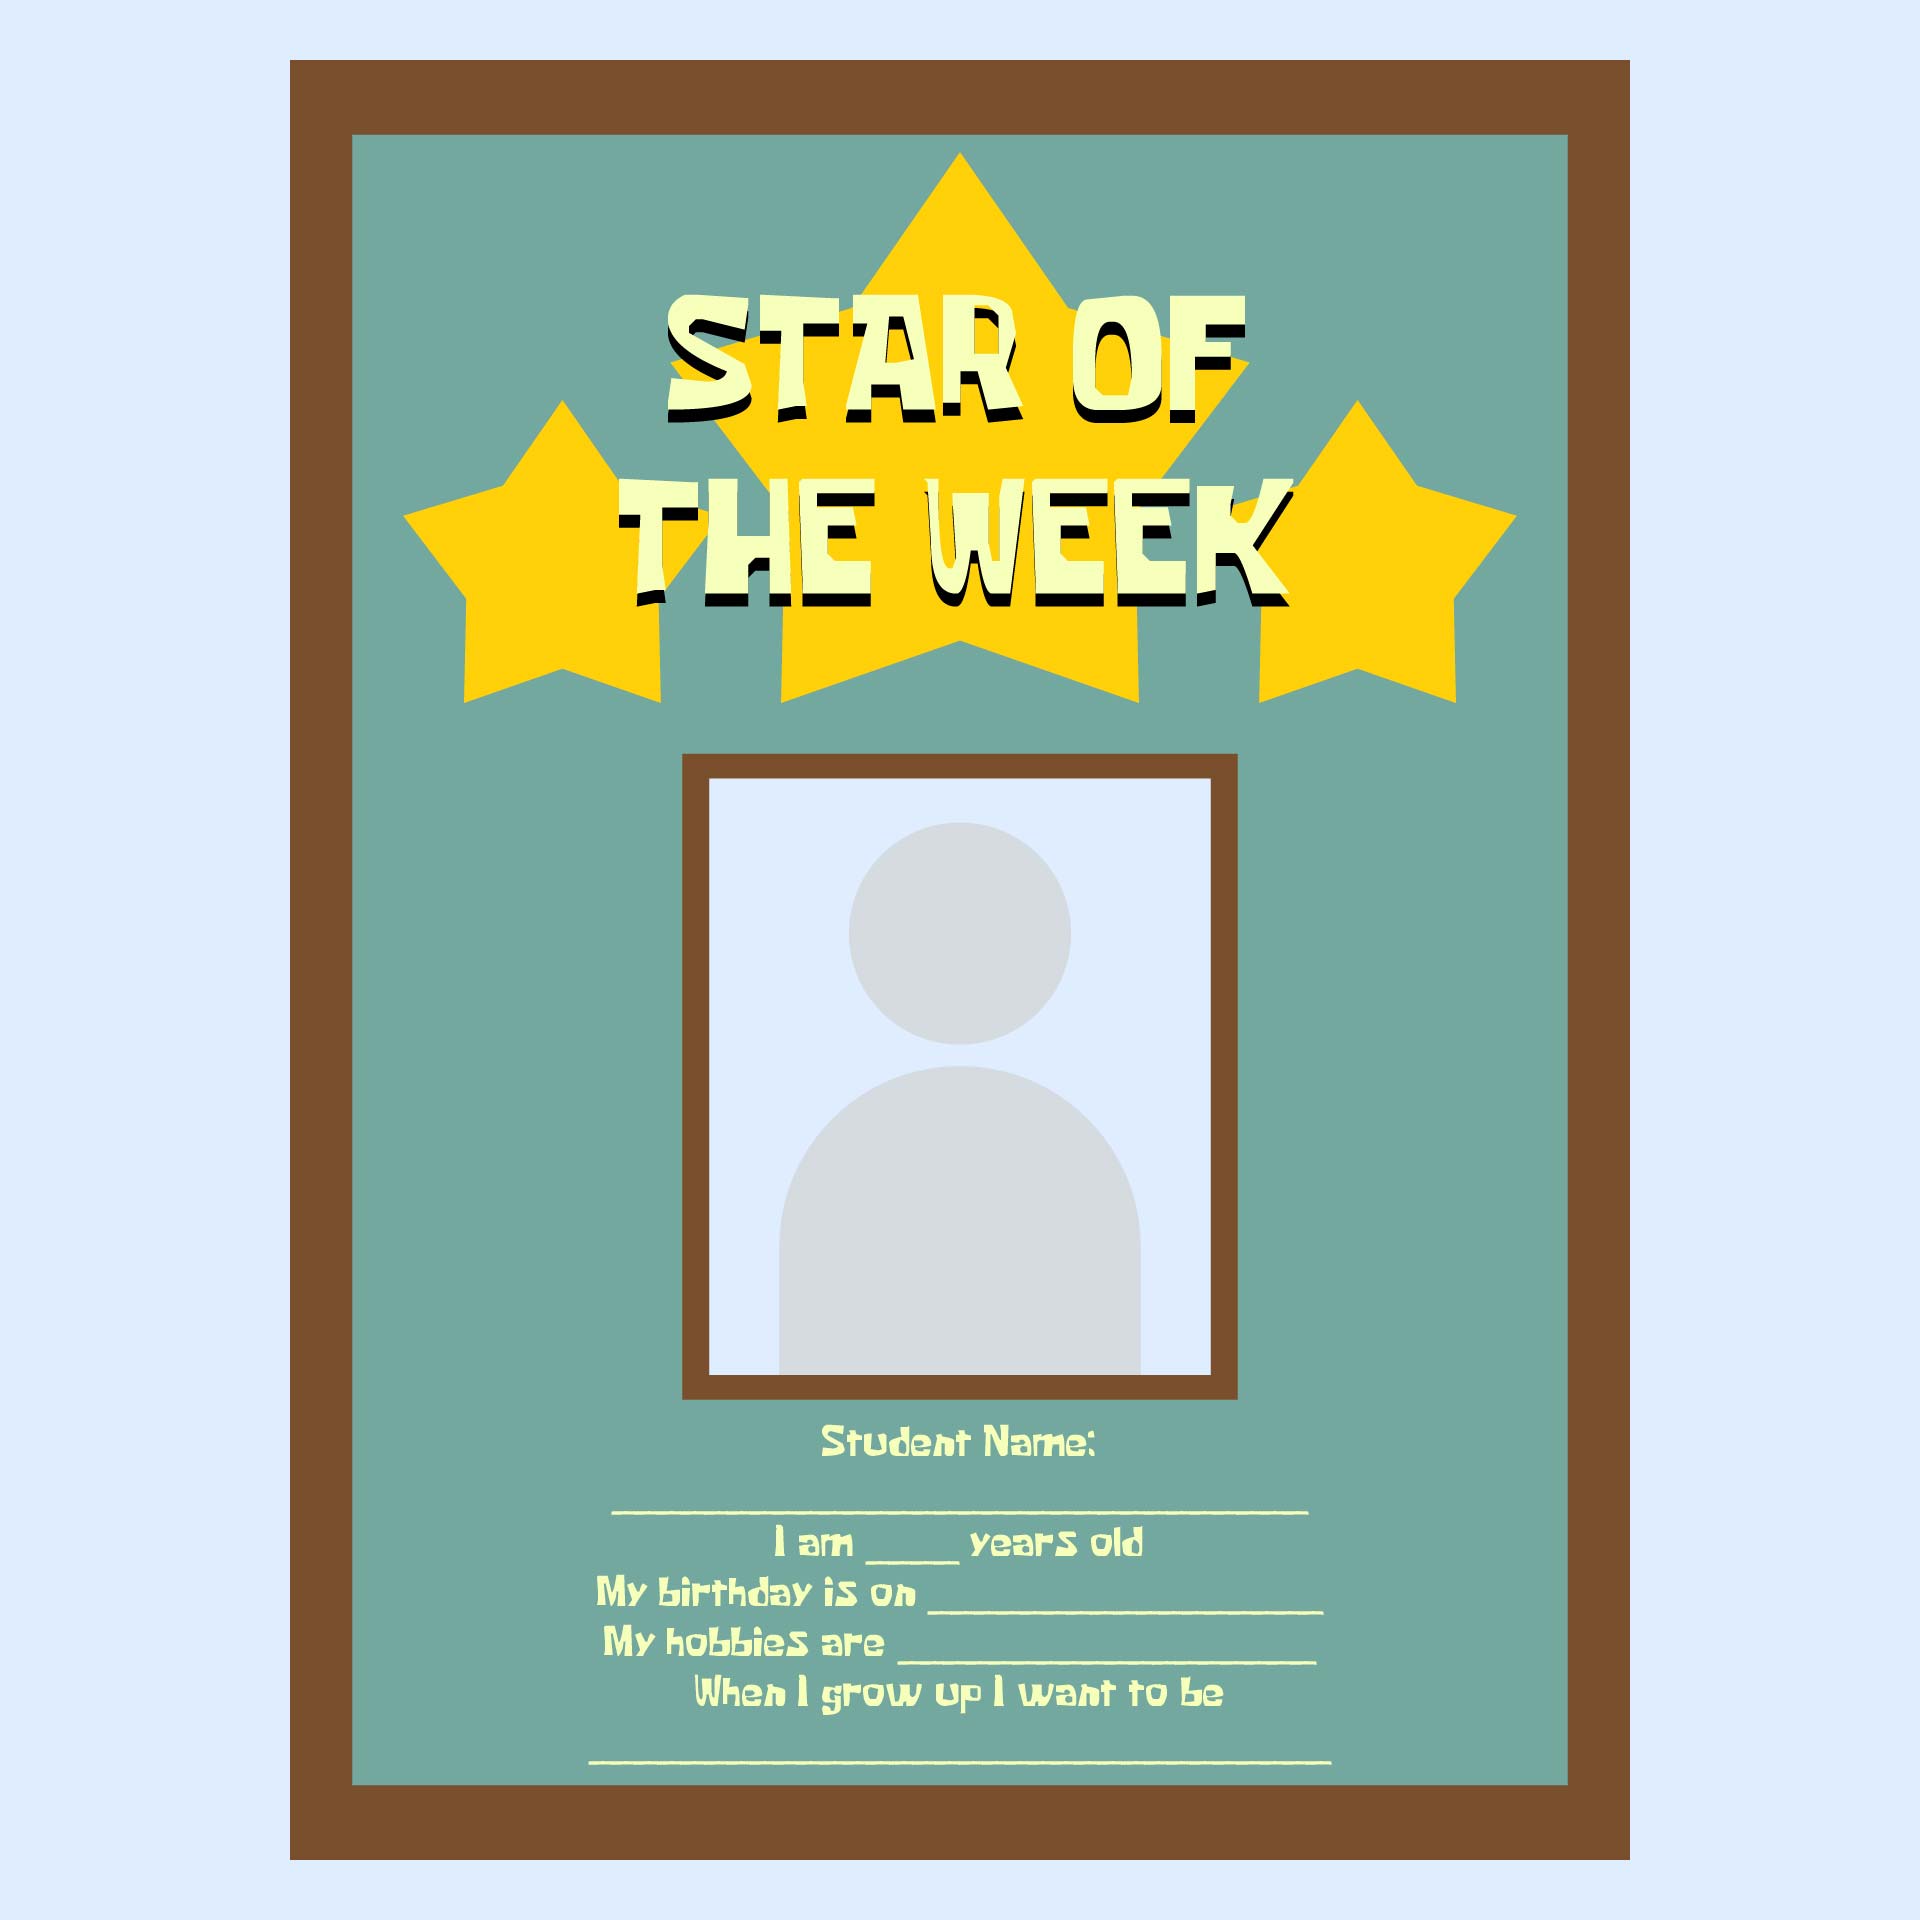 Star Student of the Week Template